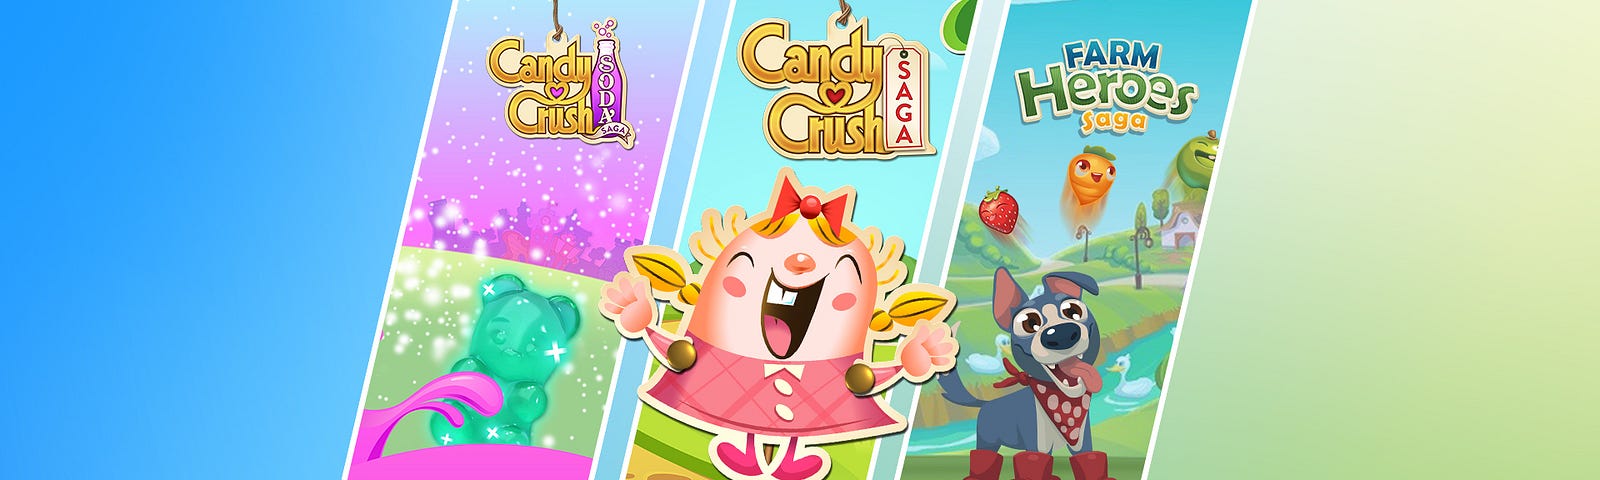 Get ready for Candy Crush All Stars with these sweet Prime Gaming drops, by Chris Leggett